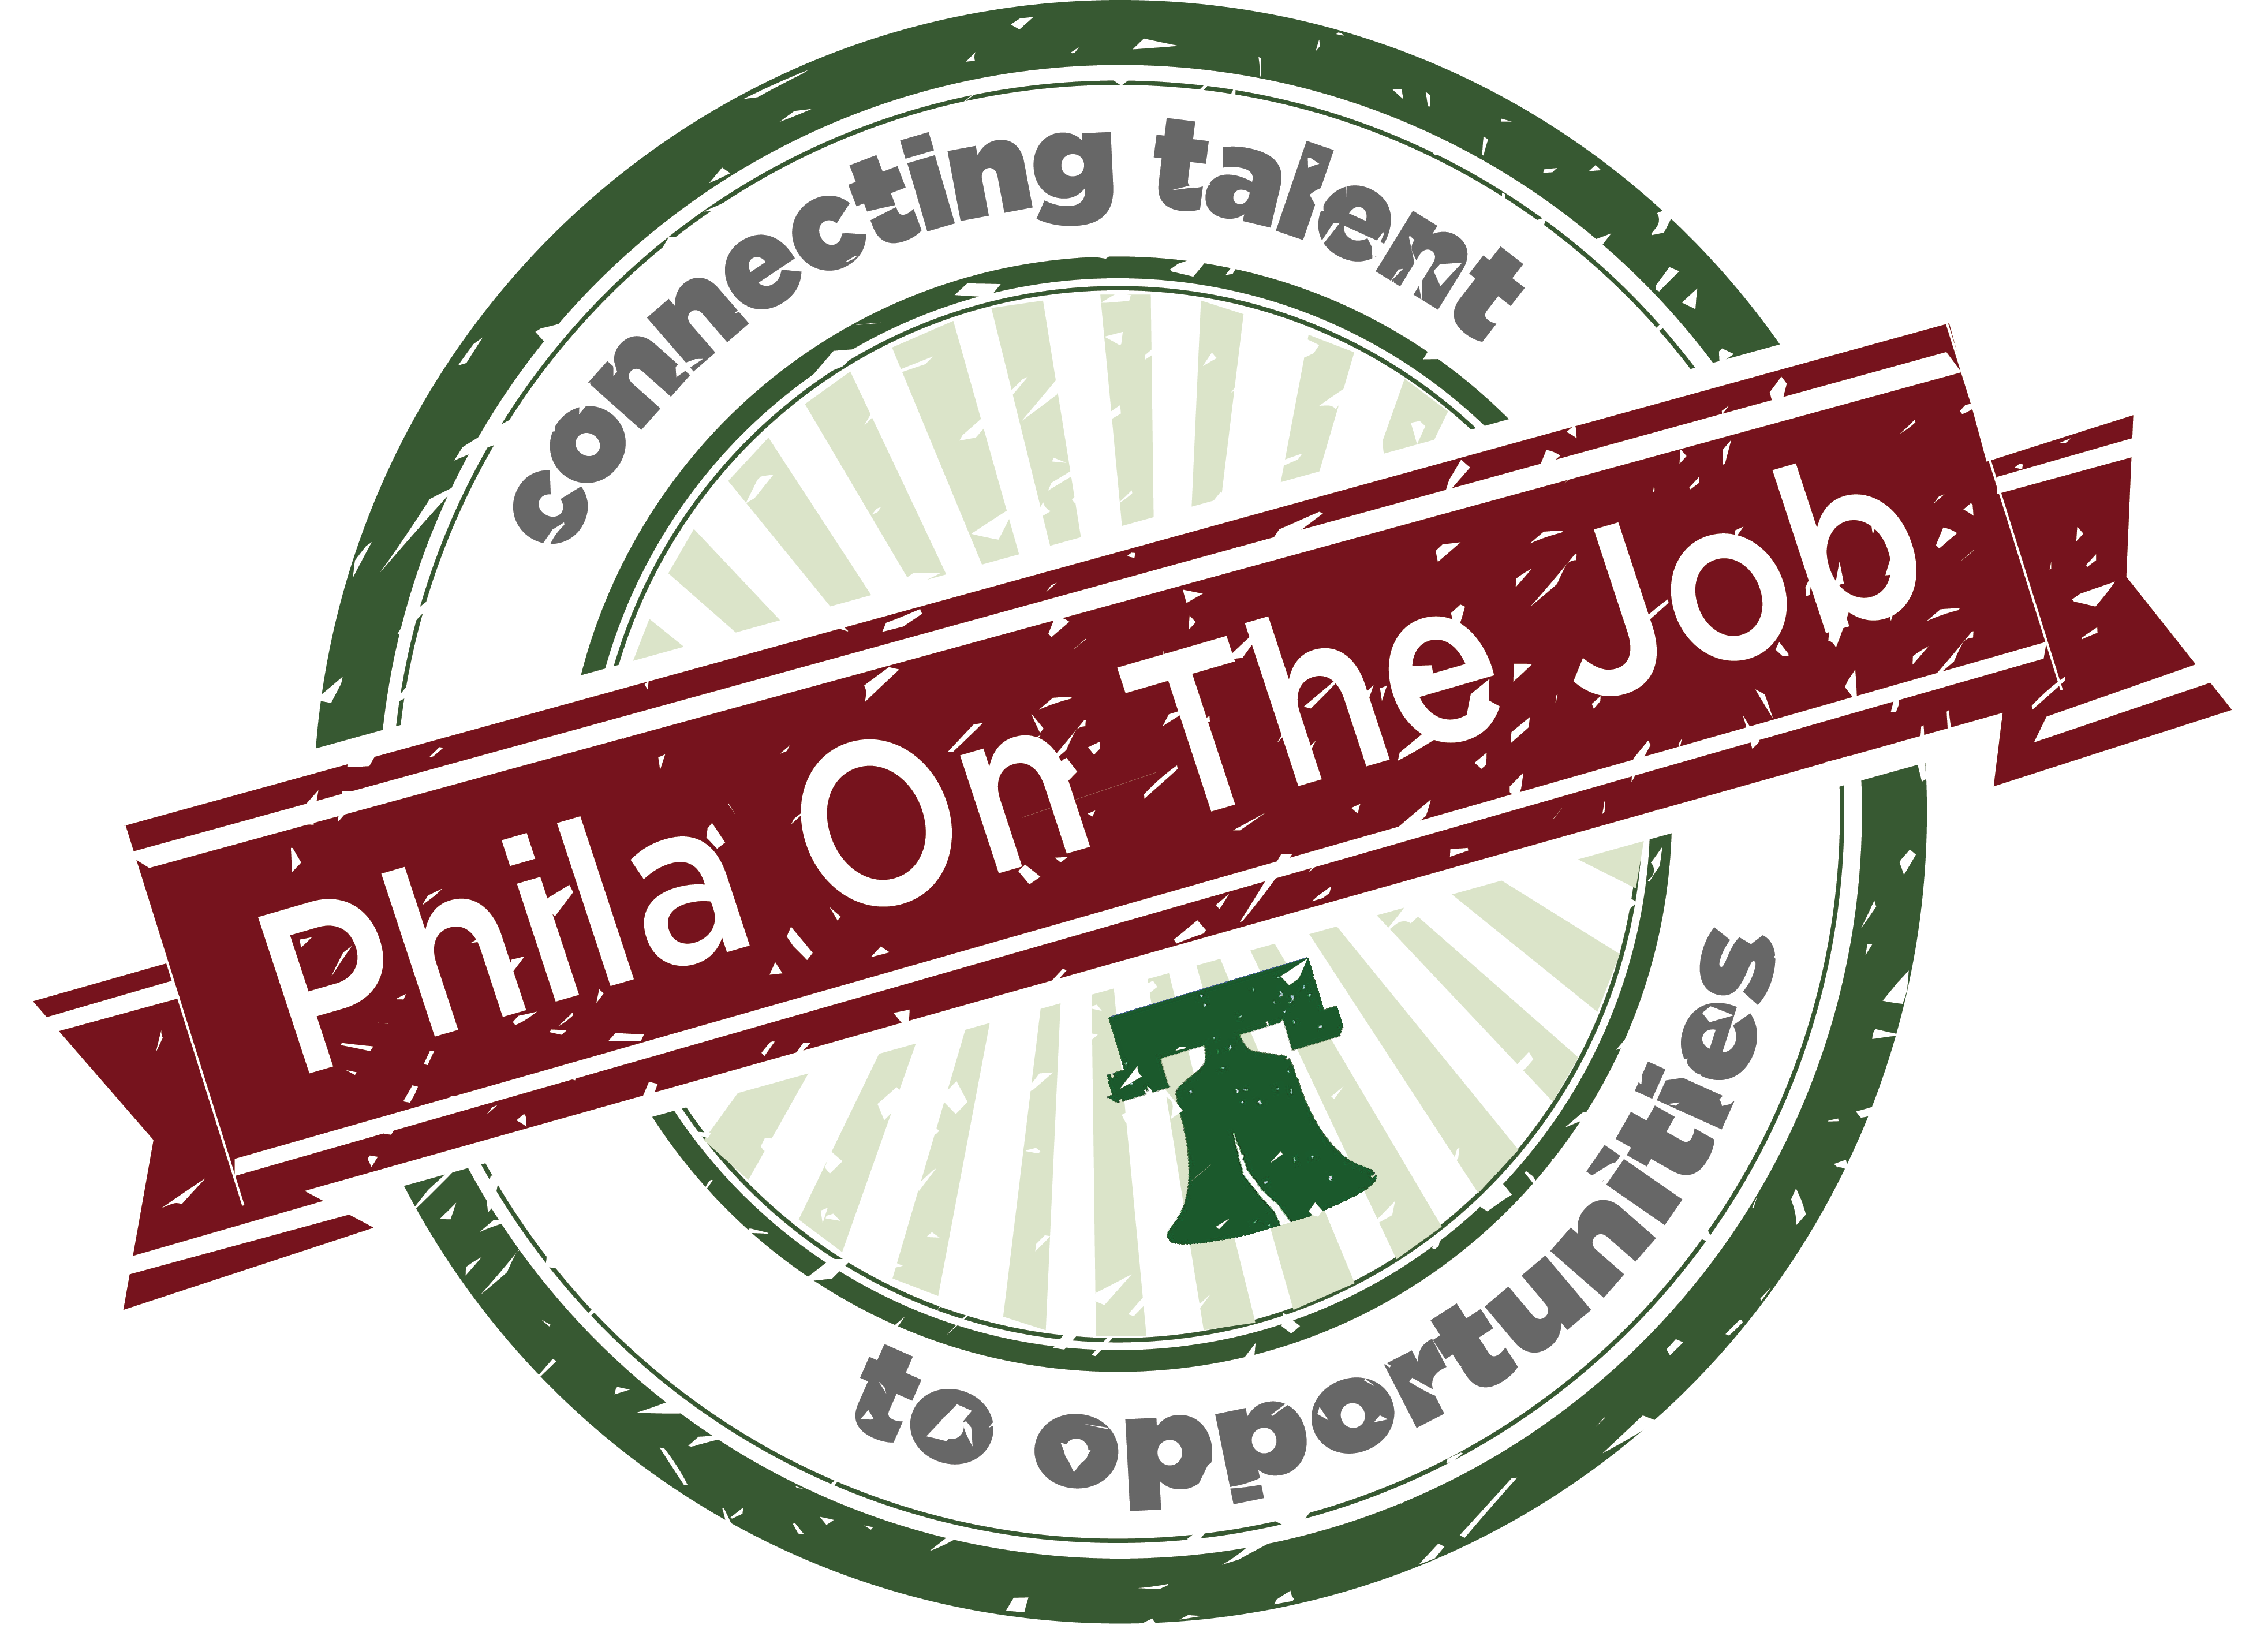 PhilaOnTheJob logo - connecting talent to opportunity